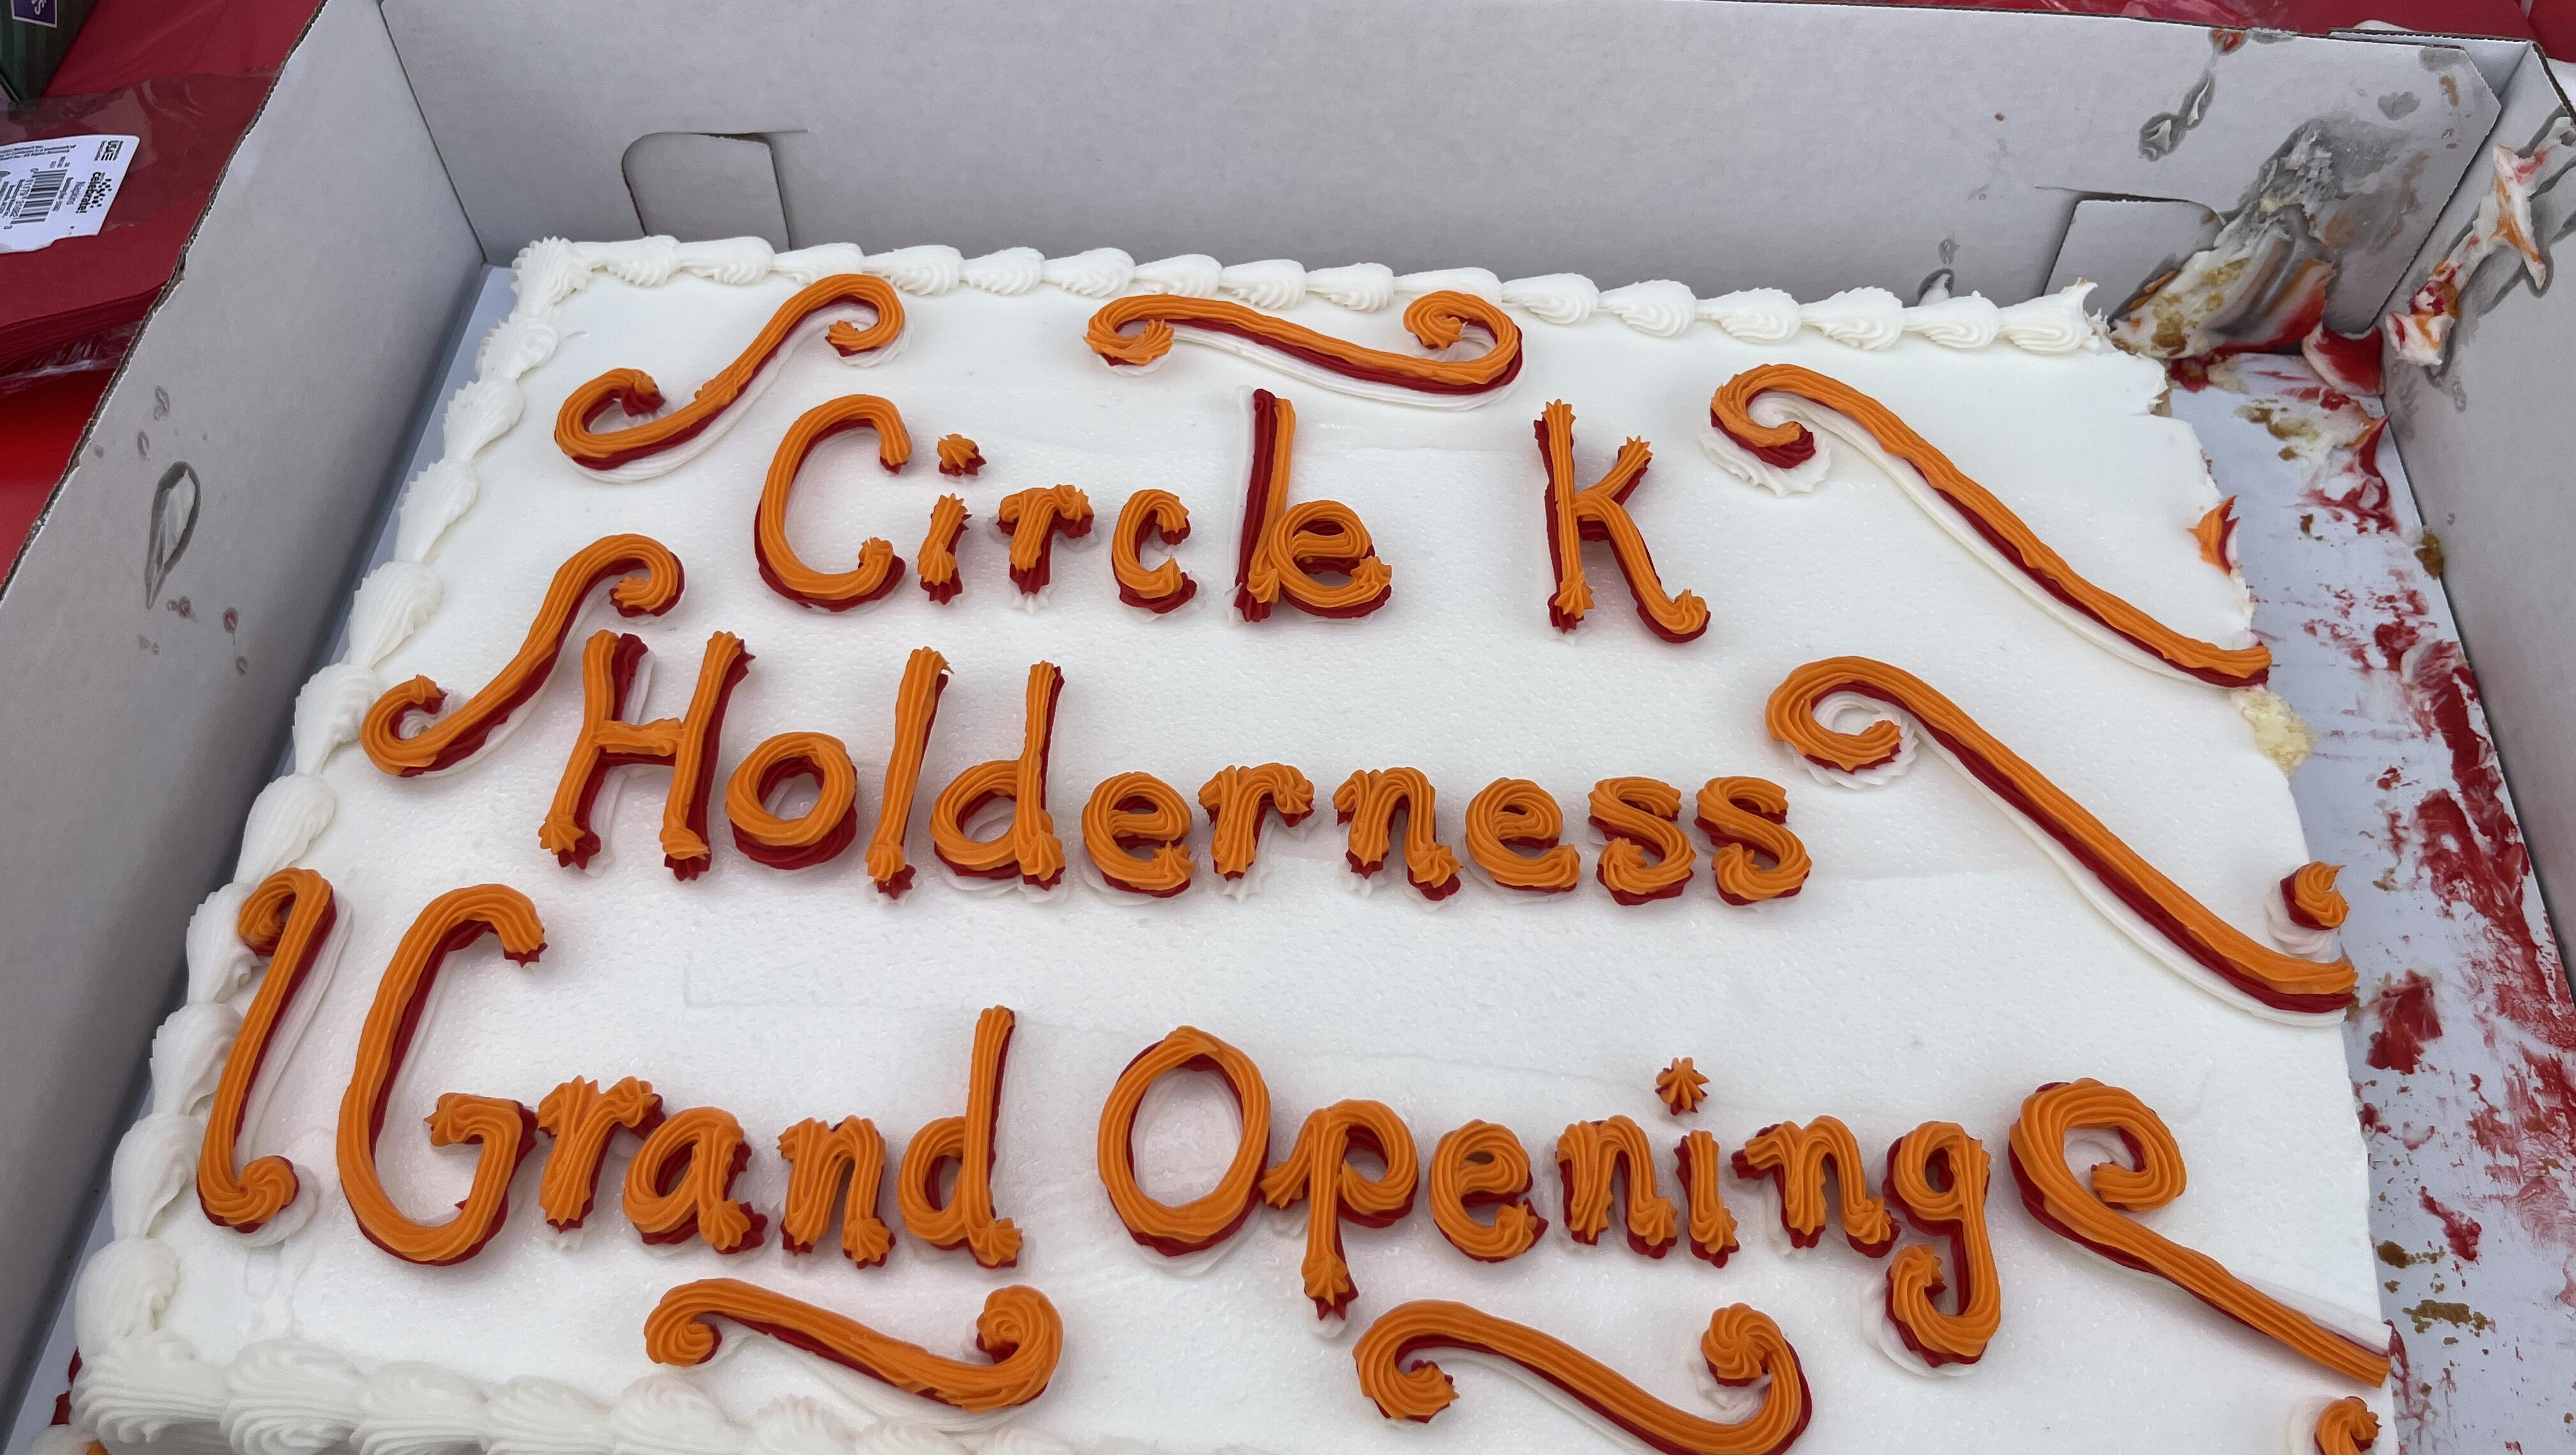 Thanks for coming out to Circle K in Holderness!